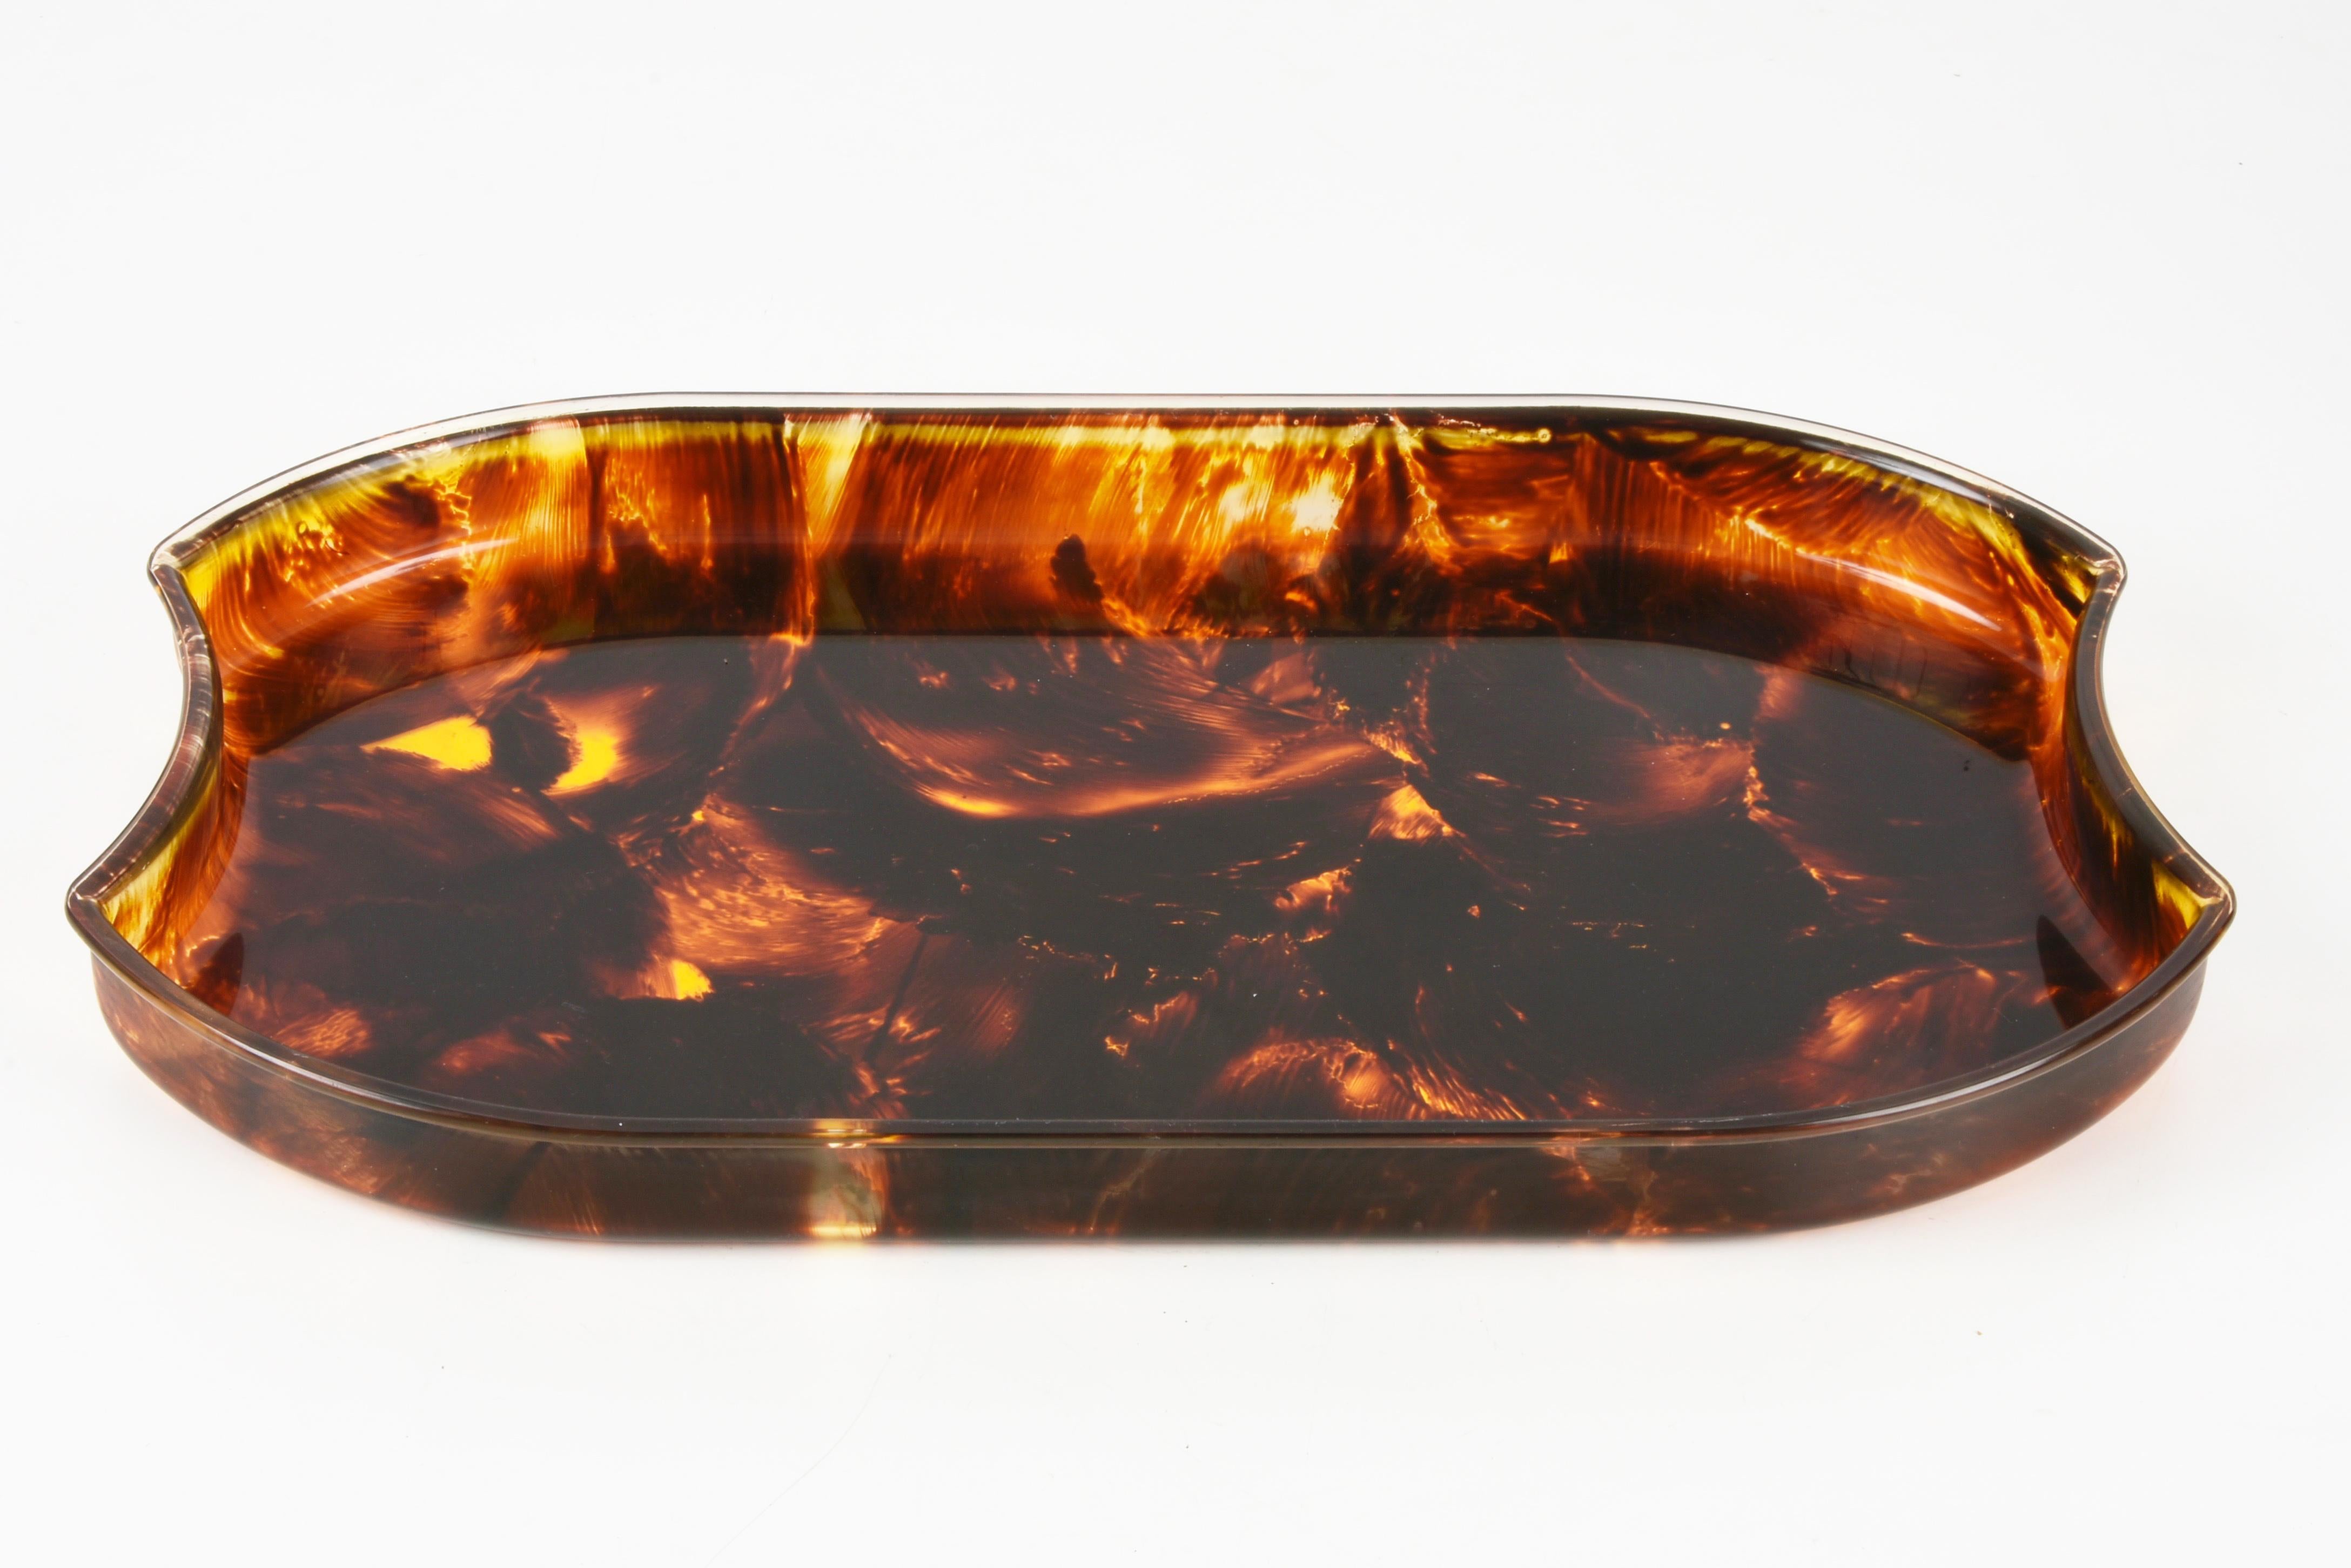 Wonderful Mid-Century lucite tray with a fantastic tortoiseshell effect. This amazing piece was designed in Italy during the 1970s.

This serving tray is fantastic thanks to the elegant shape and the lovely tortoiseshell effect lucite.

It's an